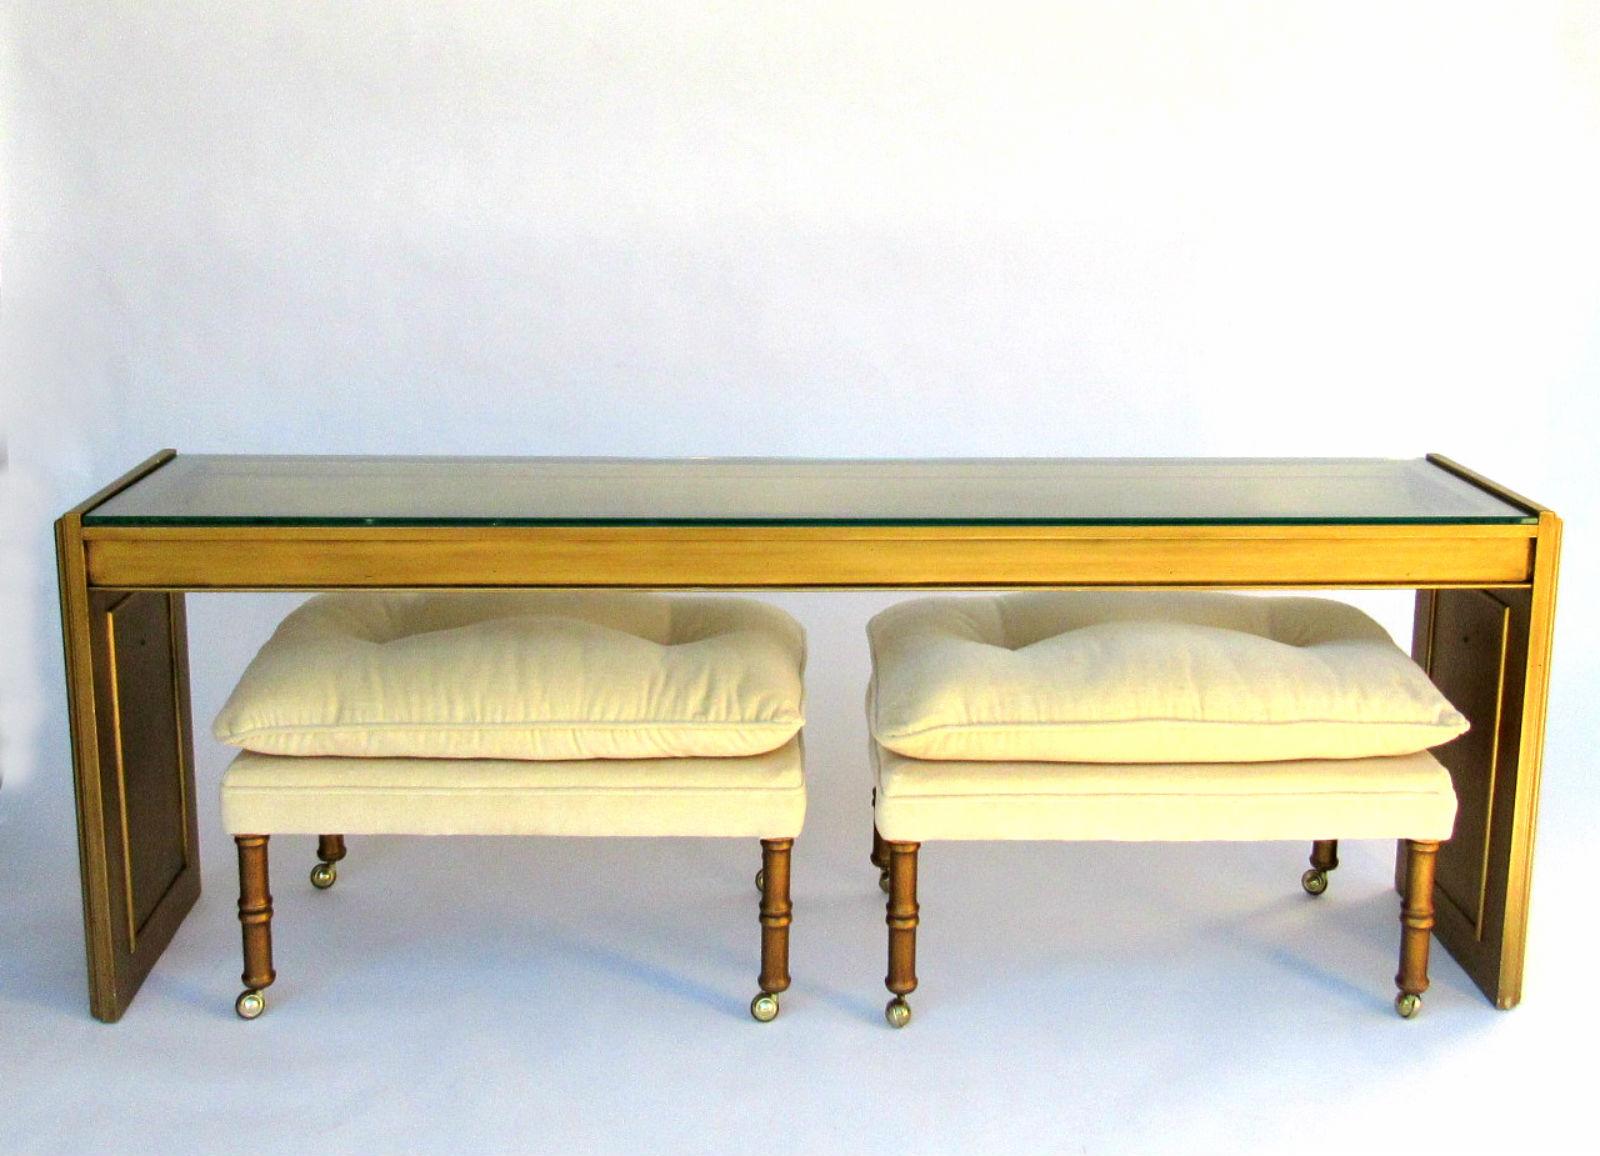 Gold Gilt painted wood and glass console from the 1970s. Stylish long console with glass insert top. Brass hardware on sides. Pair of faux bamboo stools shown in pictures available and listed separately for sale.